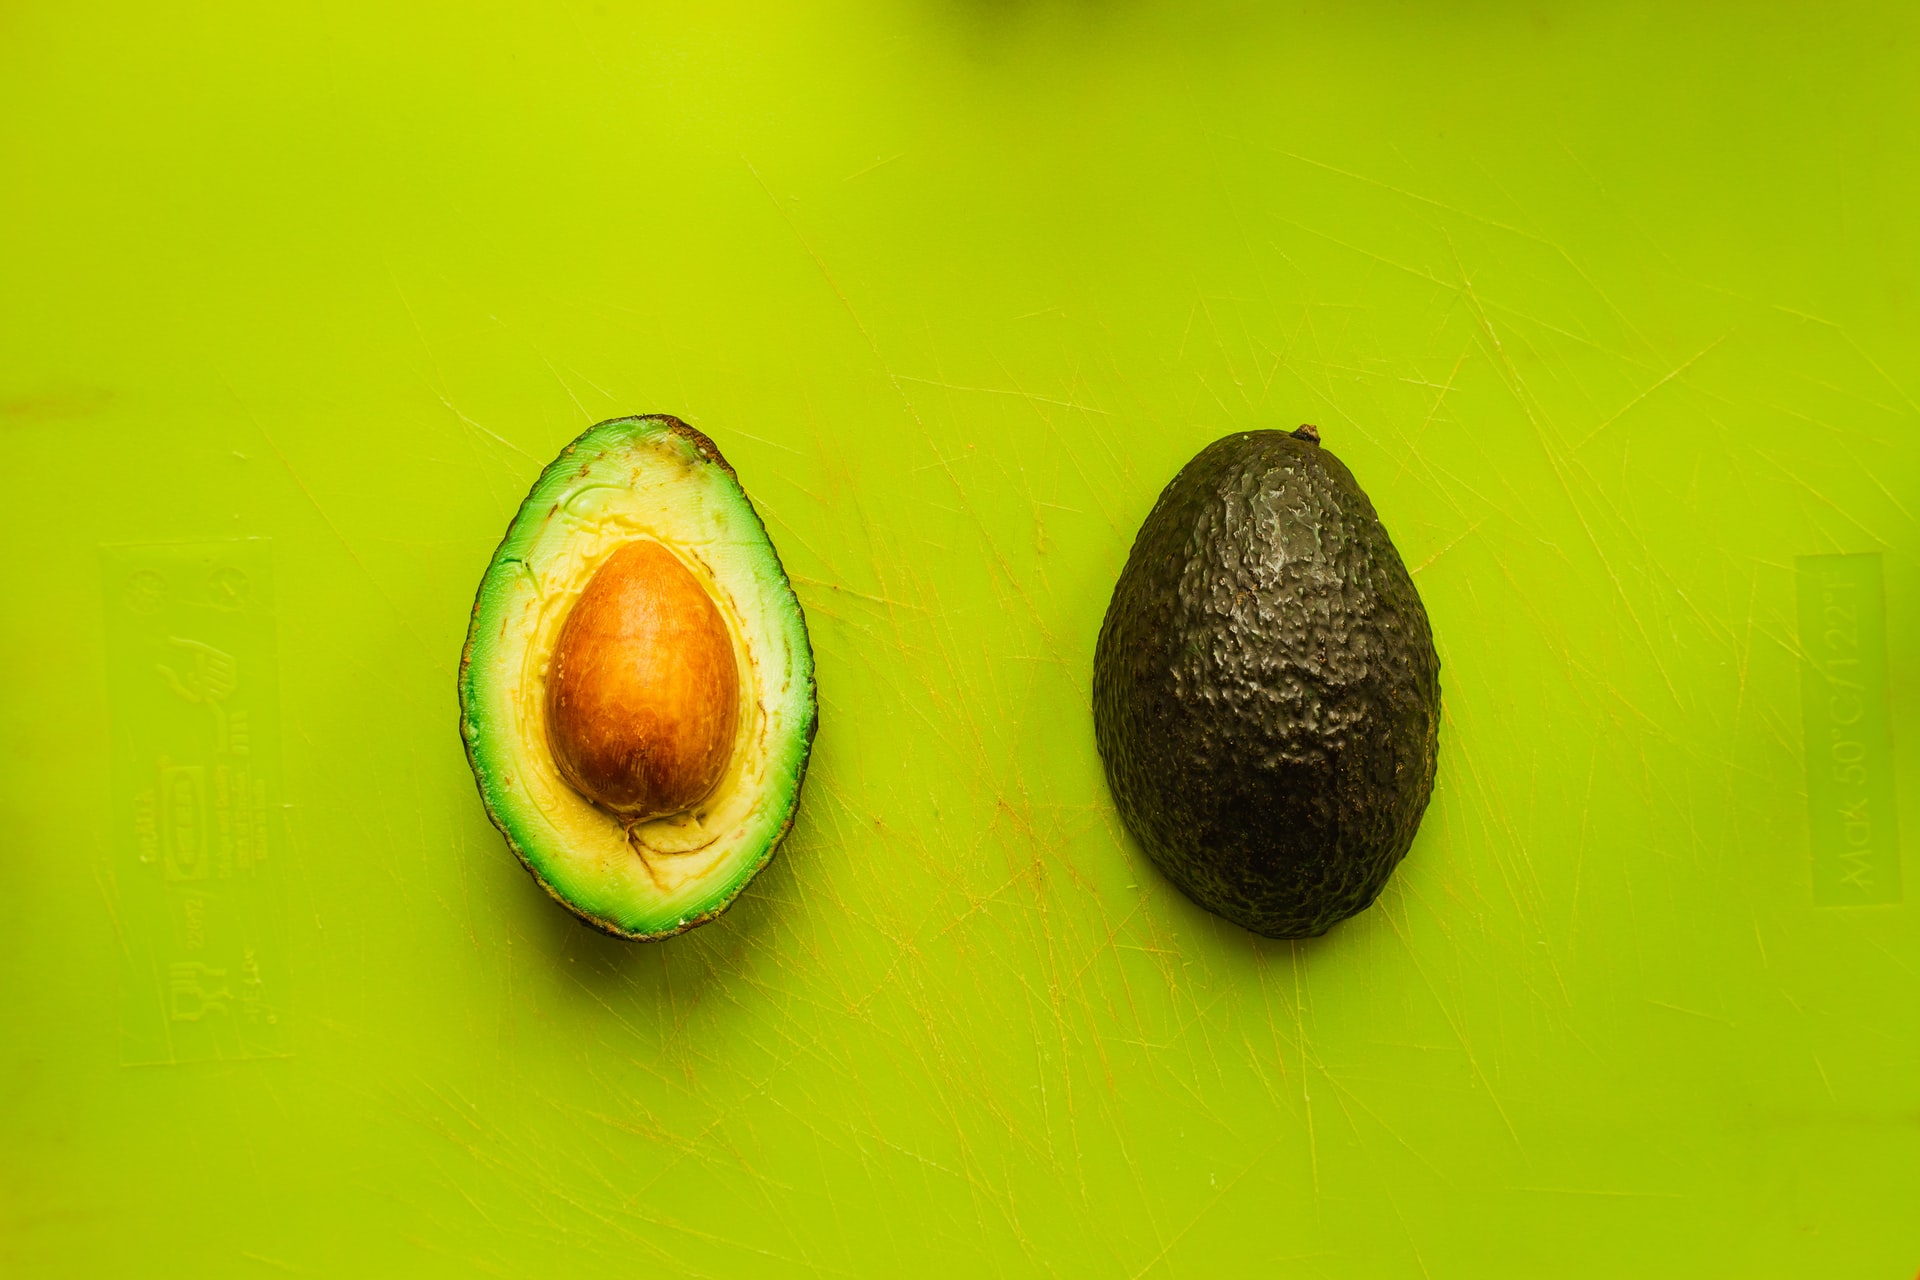 How to Plant Your First Avocado During Quarantine 11